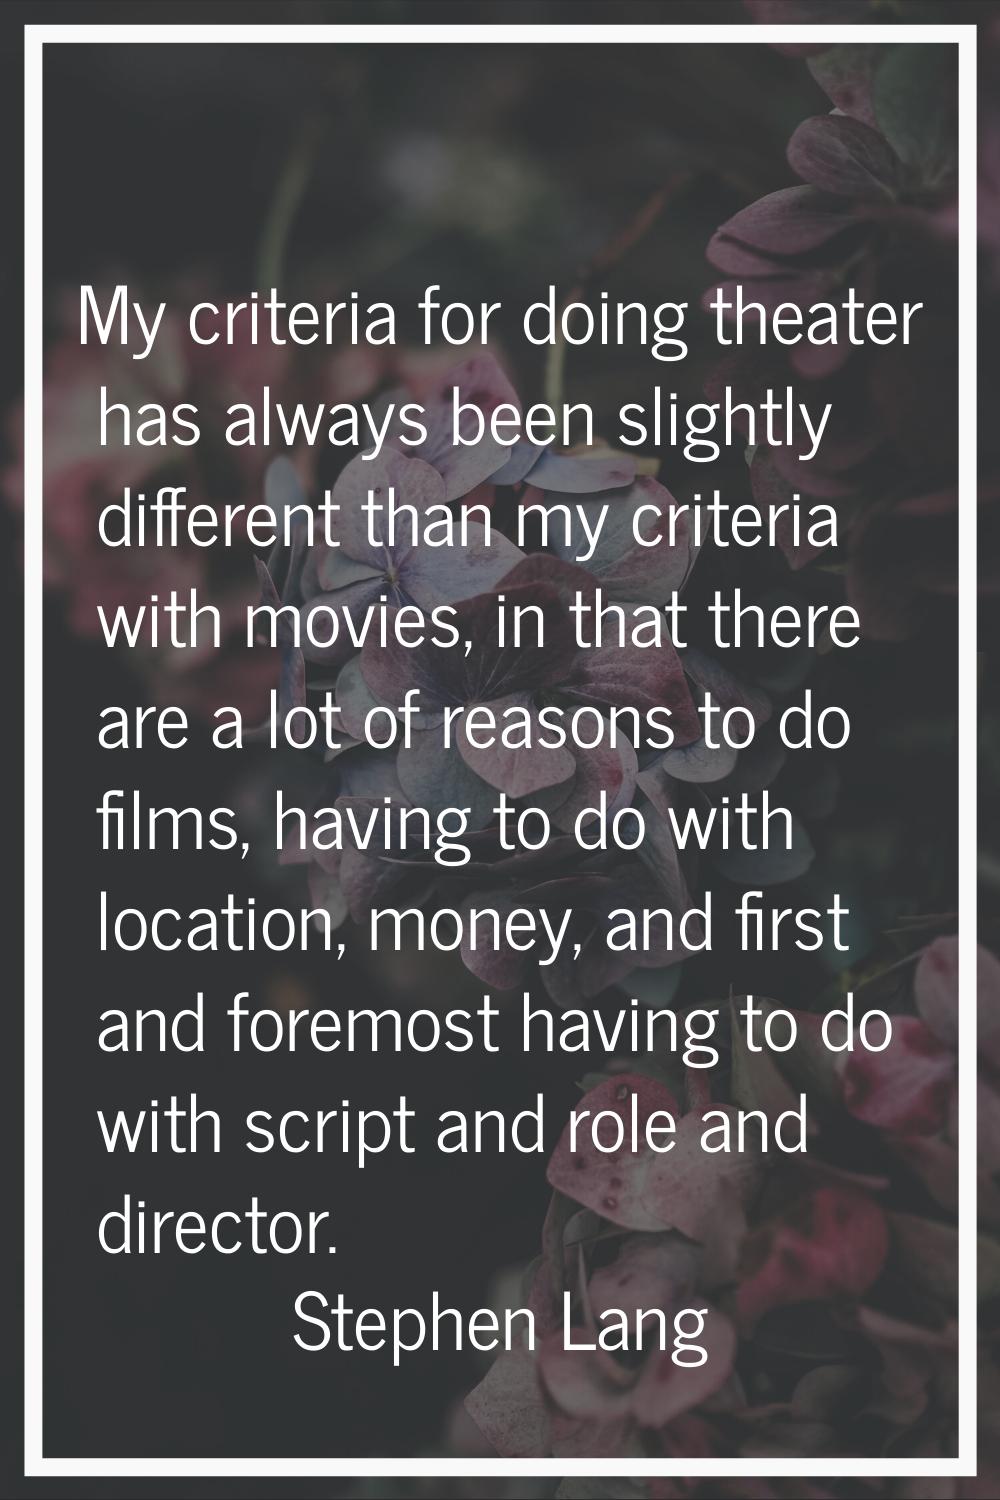 My criteria for doing theater has always been slightly different than my criteria with movies, in t